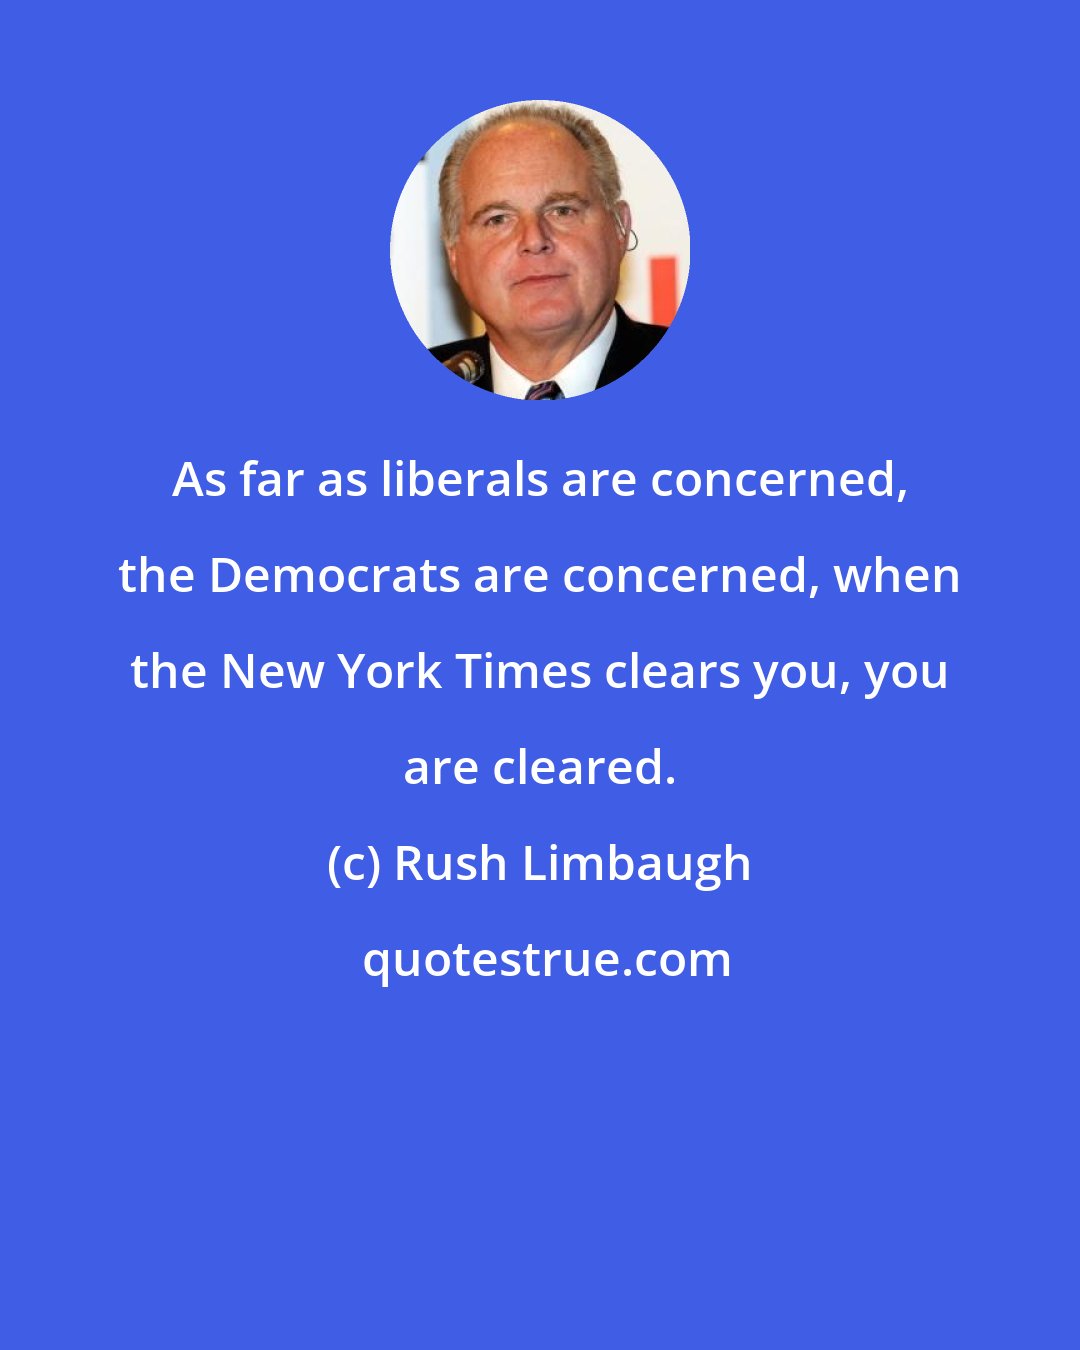 Rush Limbaugh: As far as liberals are concerned, the Democrats are concerned, when the New York Times clears you, you are cleared.